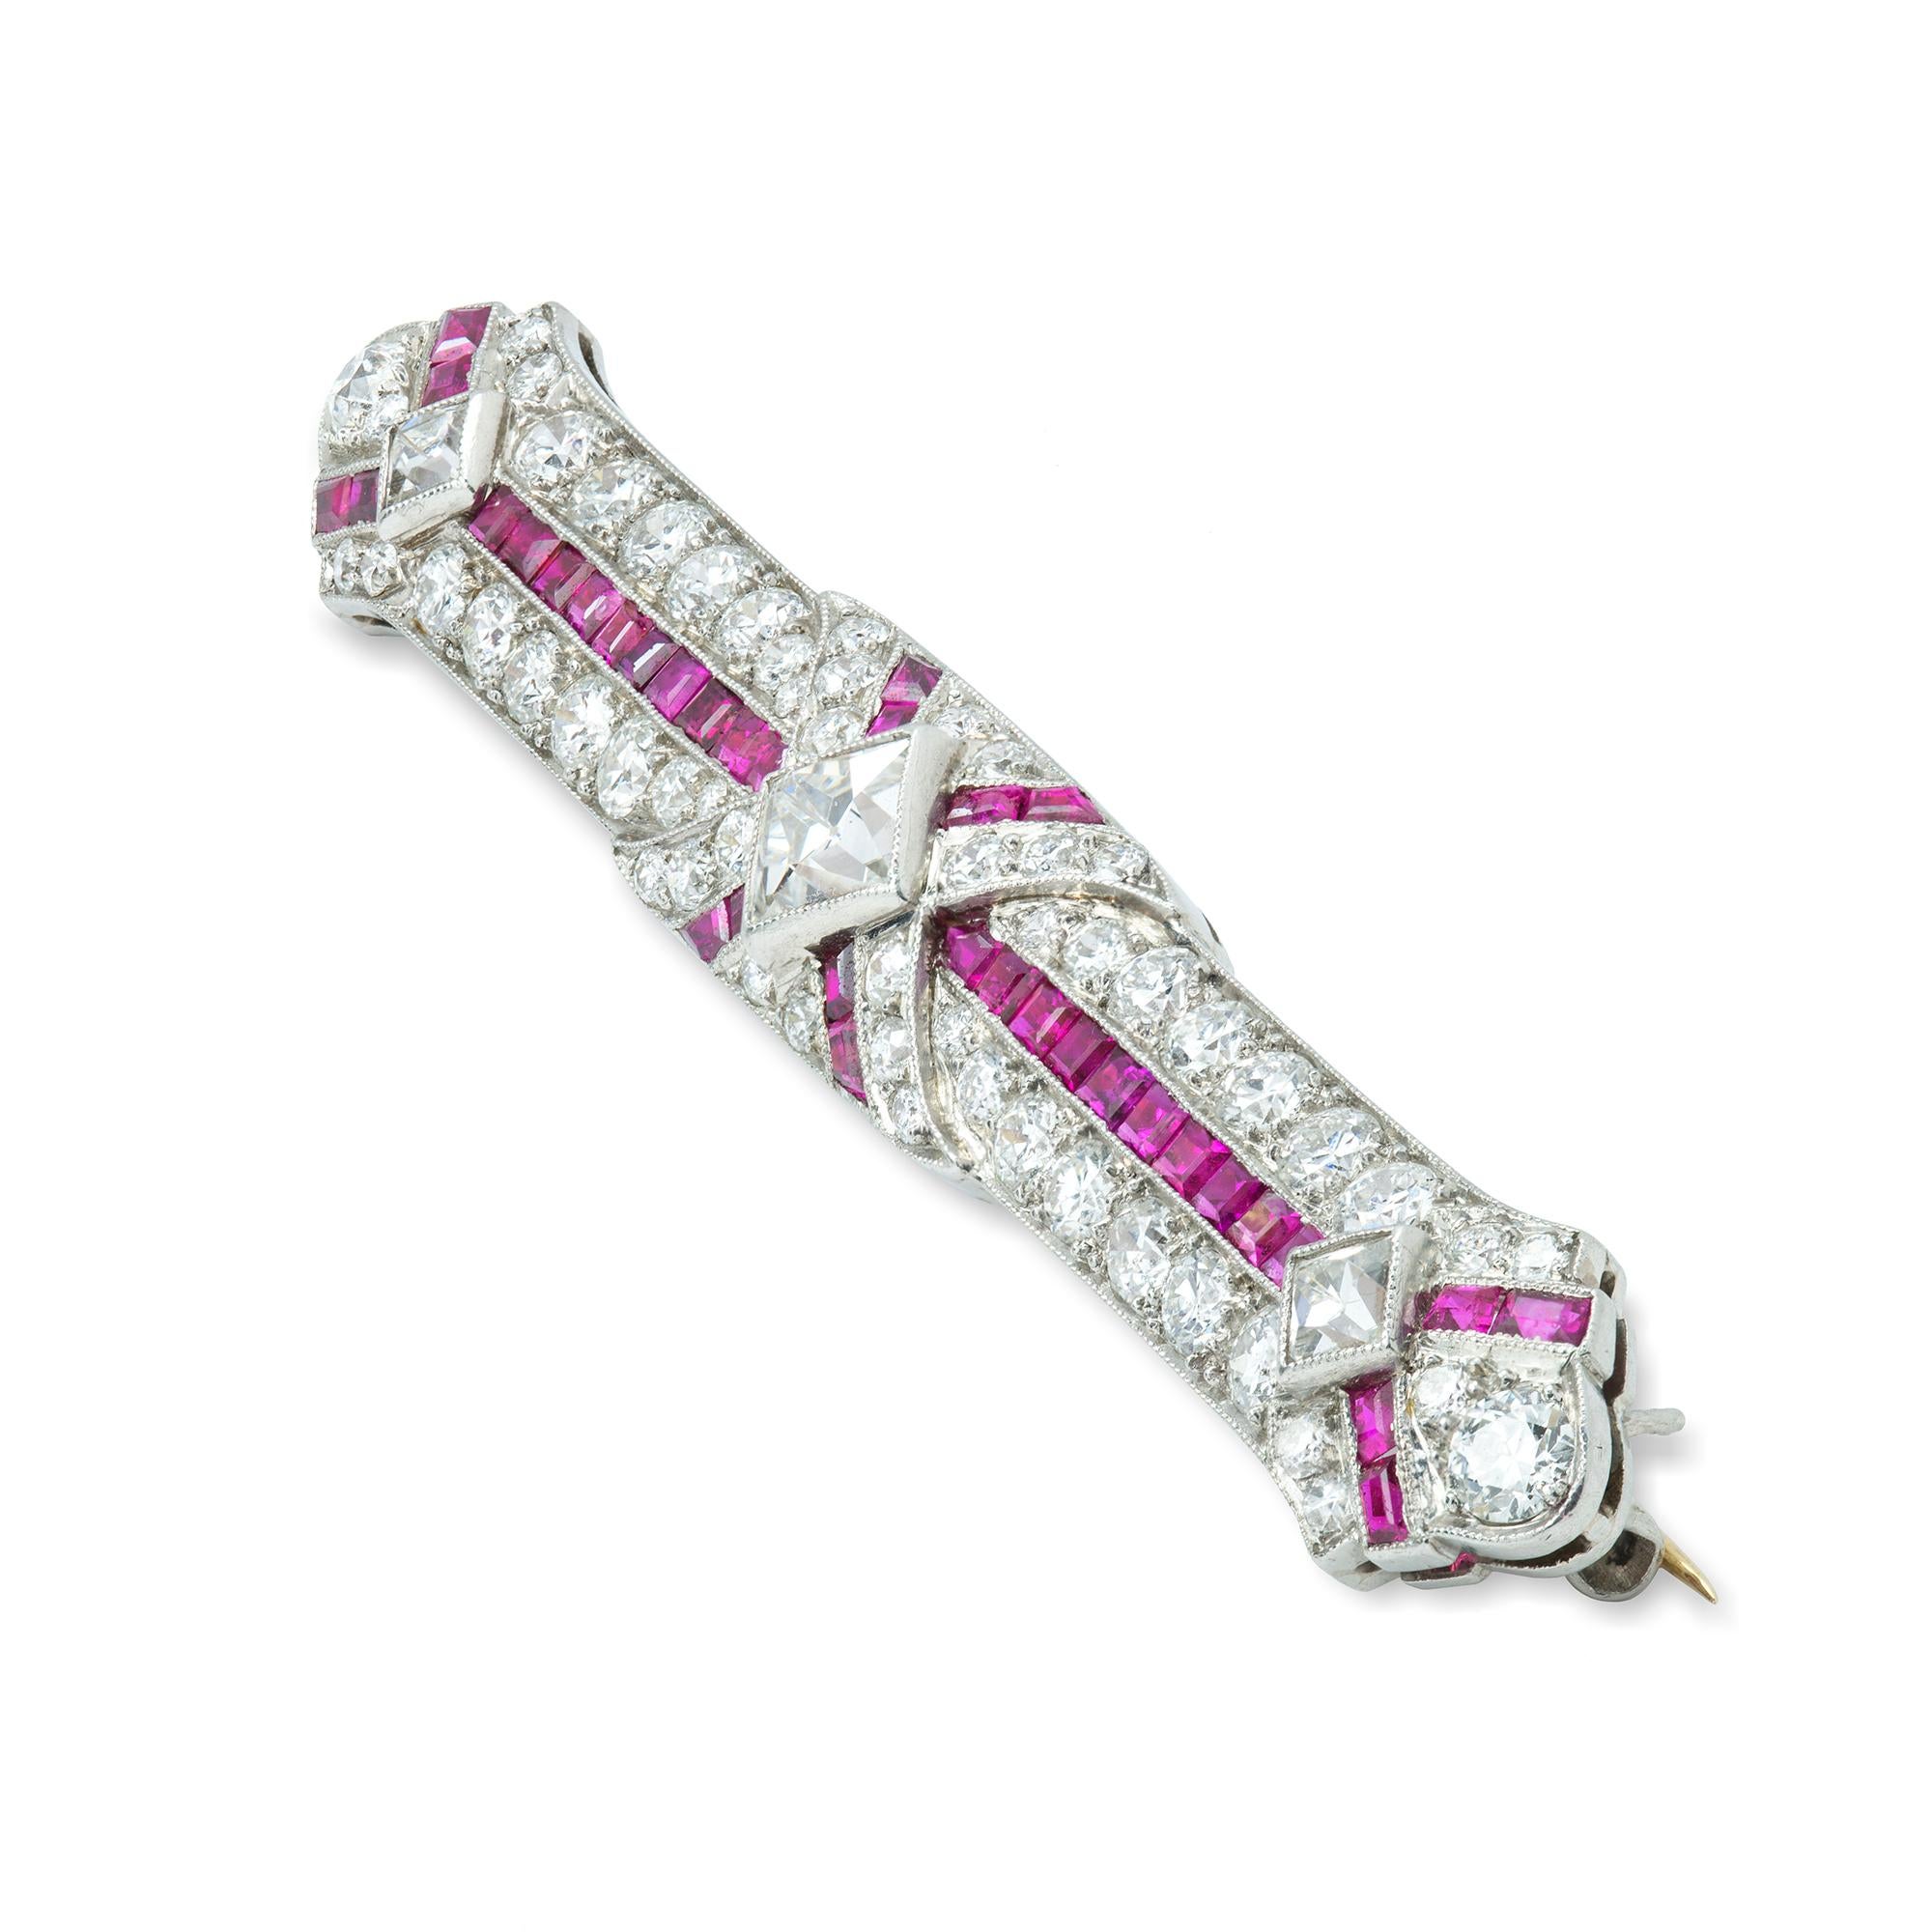 An Art Deco ruby and diamond bar brooch, the thirty-six calibre-cut rubies weighing approximately a total of 1.4 carats accompanied by GCS Report stating to be of Burmese origin with no indication of heat treatment, set with brilliant-cut and